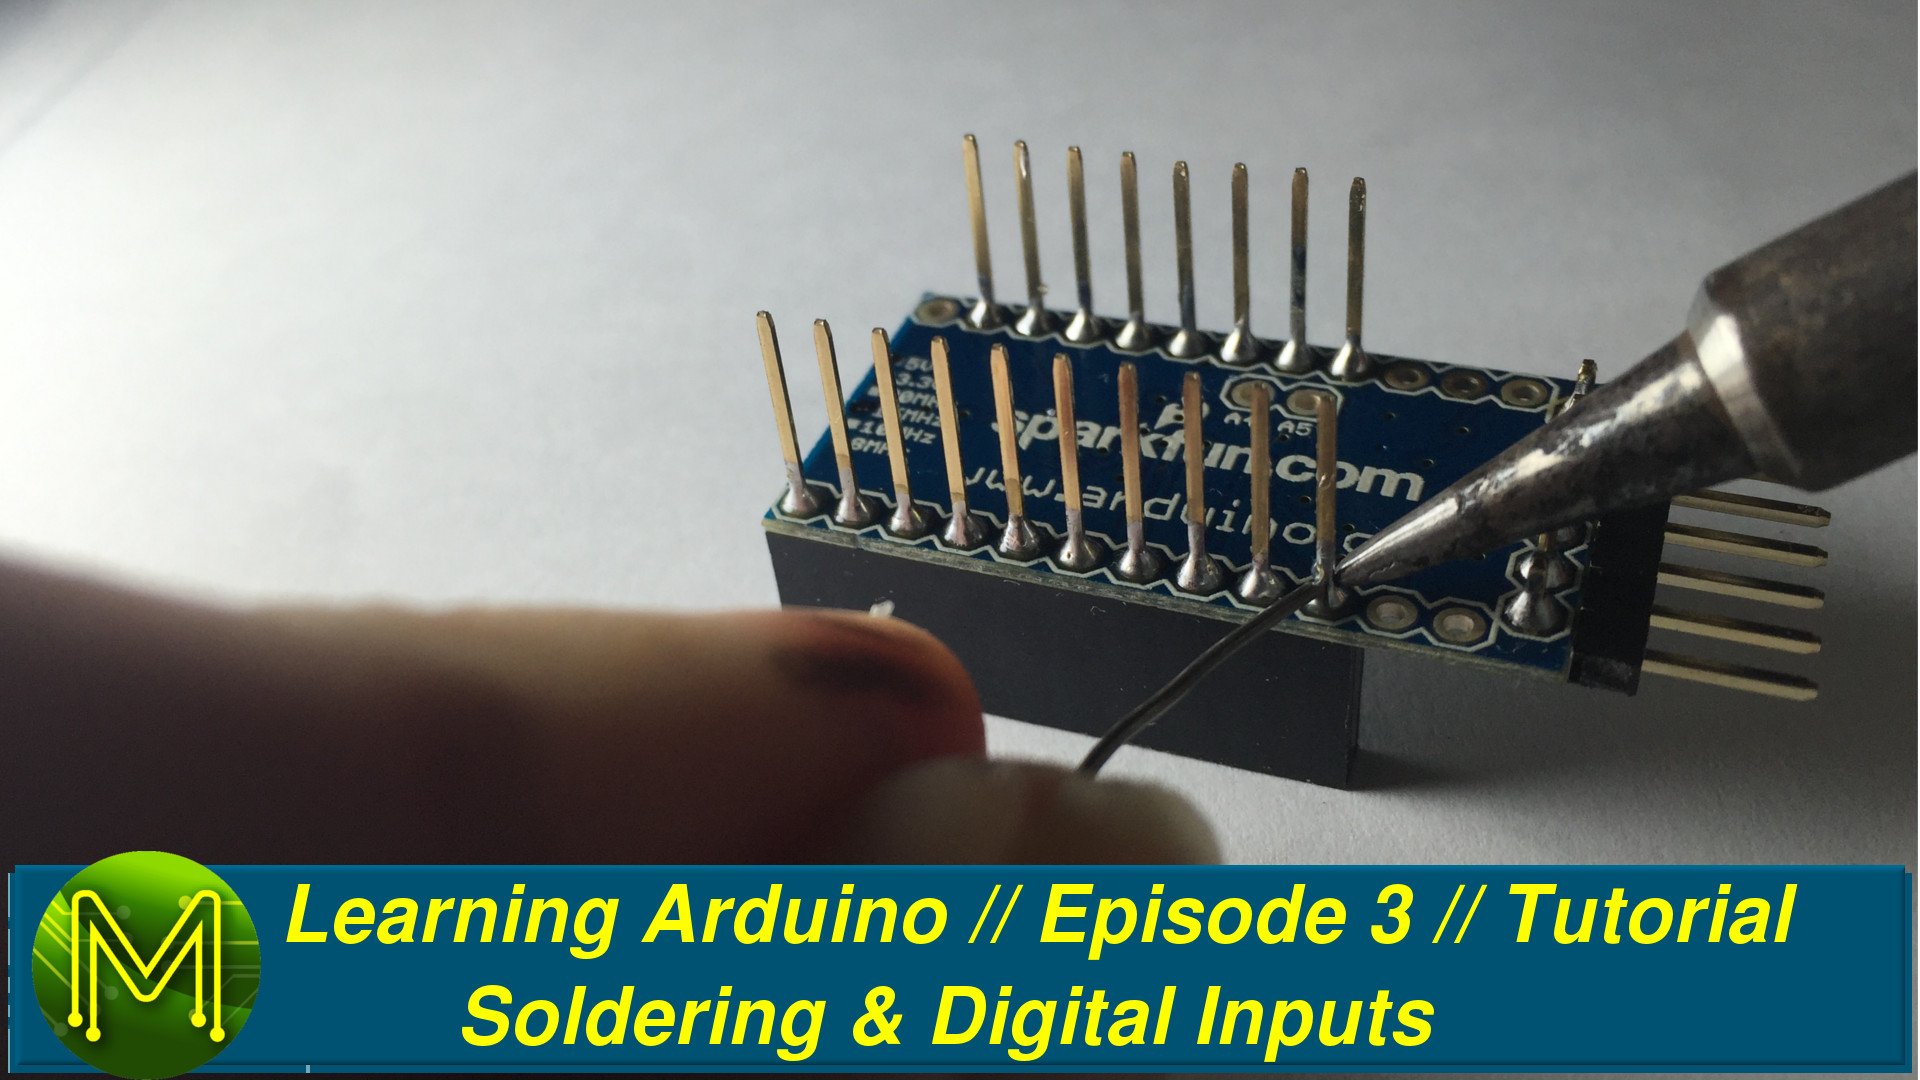 Learning Arduino: Soldering and Digital Inputs // Episode 3 // Tutorial